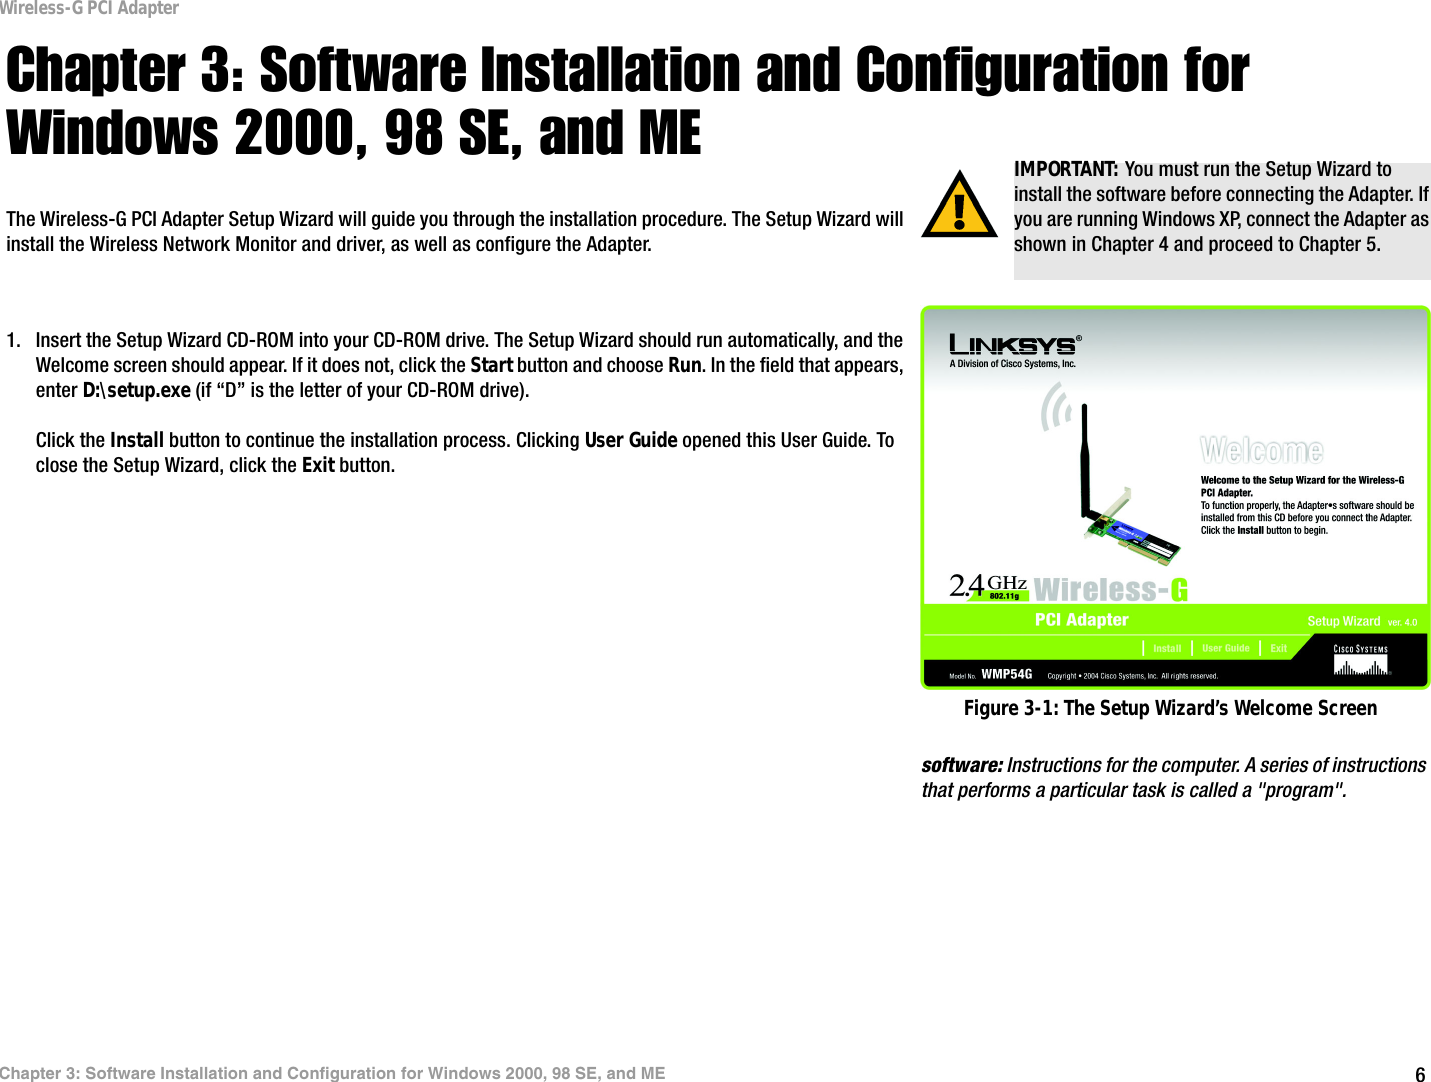 6Chapter 3: Software Installation and Configuration for Windows 2000, 98 SE, and MEWireless-G PCI AdapterChapter 3: Software Installation and Configuration for Windows 2000, 98 SE, and METhe Wireless-G PCI Adapter Setup Wizard will guide you through the installation procedure. The Setup Wizard will install the Wireless Network Monitor and driver, as well as configure the Adapter.1. Insert the Setup Wizard CD-ROM into your CD-ROM drive. The Setup Wizard should run automatically, and the Welcome screen should appear. If it does not, click the Start button and choose Run. In the field that appears, enter D:\setup.exe (if “D” is the letter of your CD-ROM drive).Click the Install button to continue the installation process. Clicking User Guide opened this User Guide. To close the Setup Wizard, click the Exit button. IMPORTANT: You must run the Setup Wizard to install the software before connecting the Adapter. If you are running Windows XP, connect the Adapter as shown in Chapter 4 and proceed to Chapter 5.Figure 3-1: The Setup Wizard’s Welcome Screensoftware: Instructions for the computer. A series of instructions that performs a particular task is called a &quot;program&quot;.